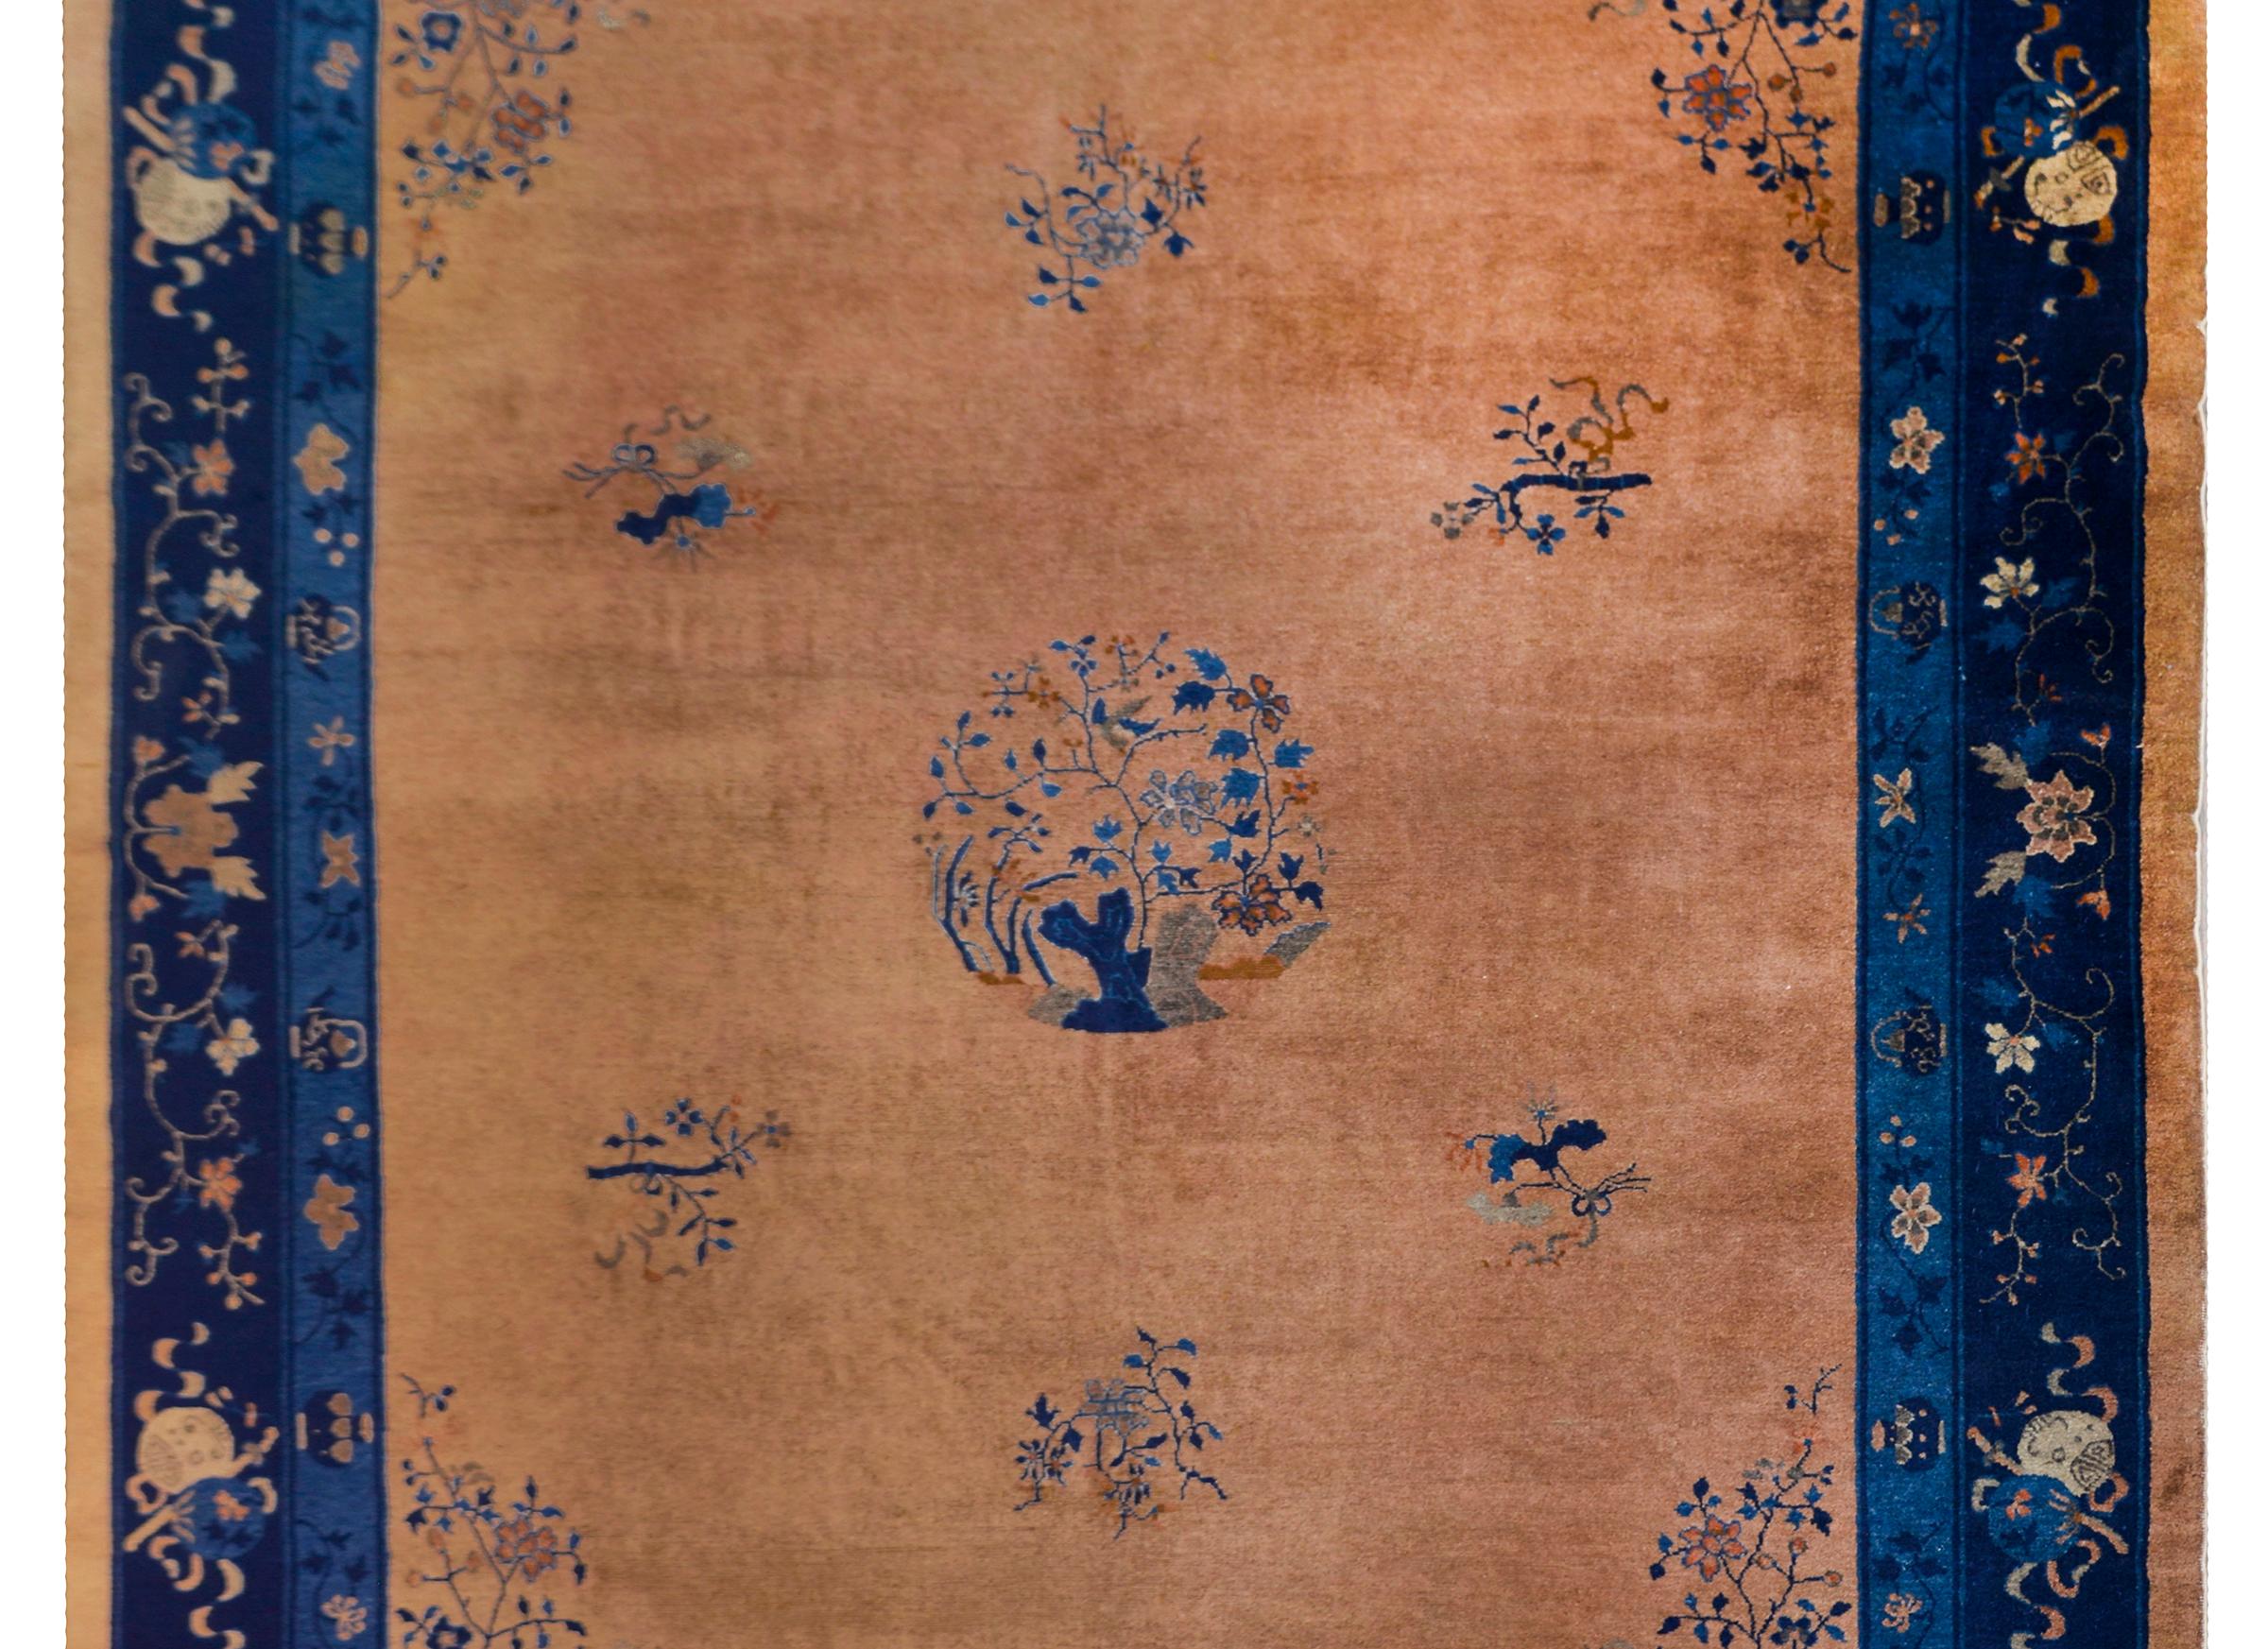 A beautiful early 20th century Chinese Feti rug with a large central floral medallion with flowering trees amidst a field of more flowers, and surrounded by a wide border containing many auspicious Chinese motifs including scrolls of knowledge, and